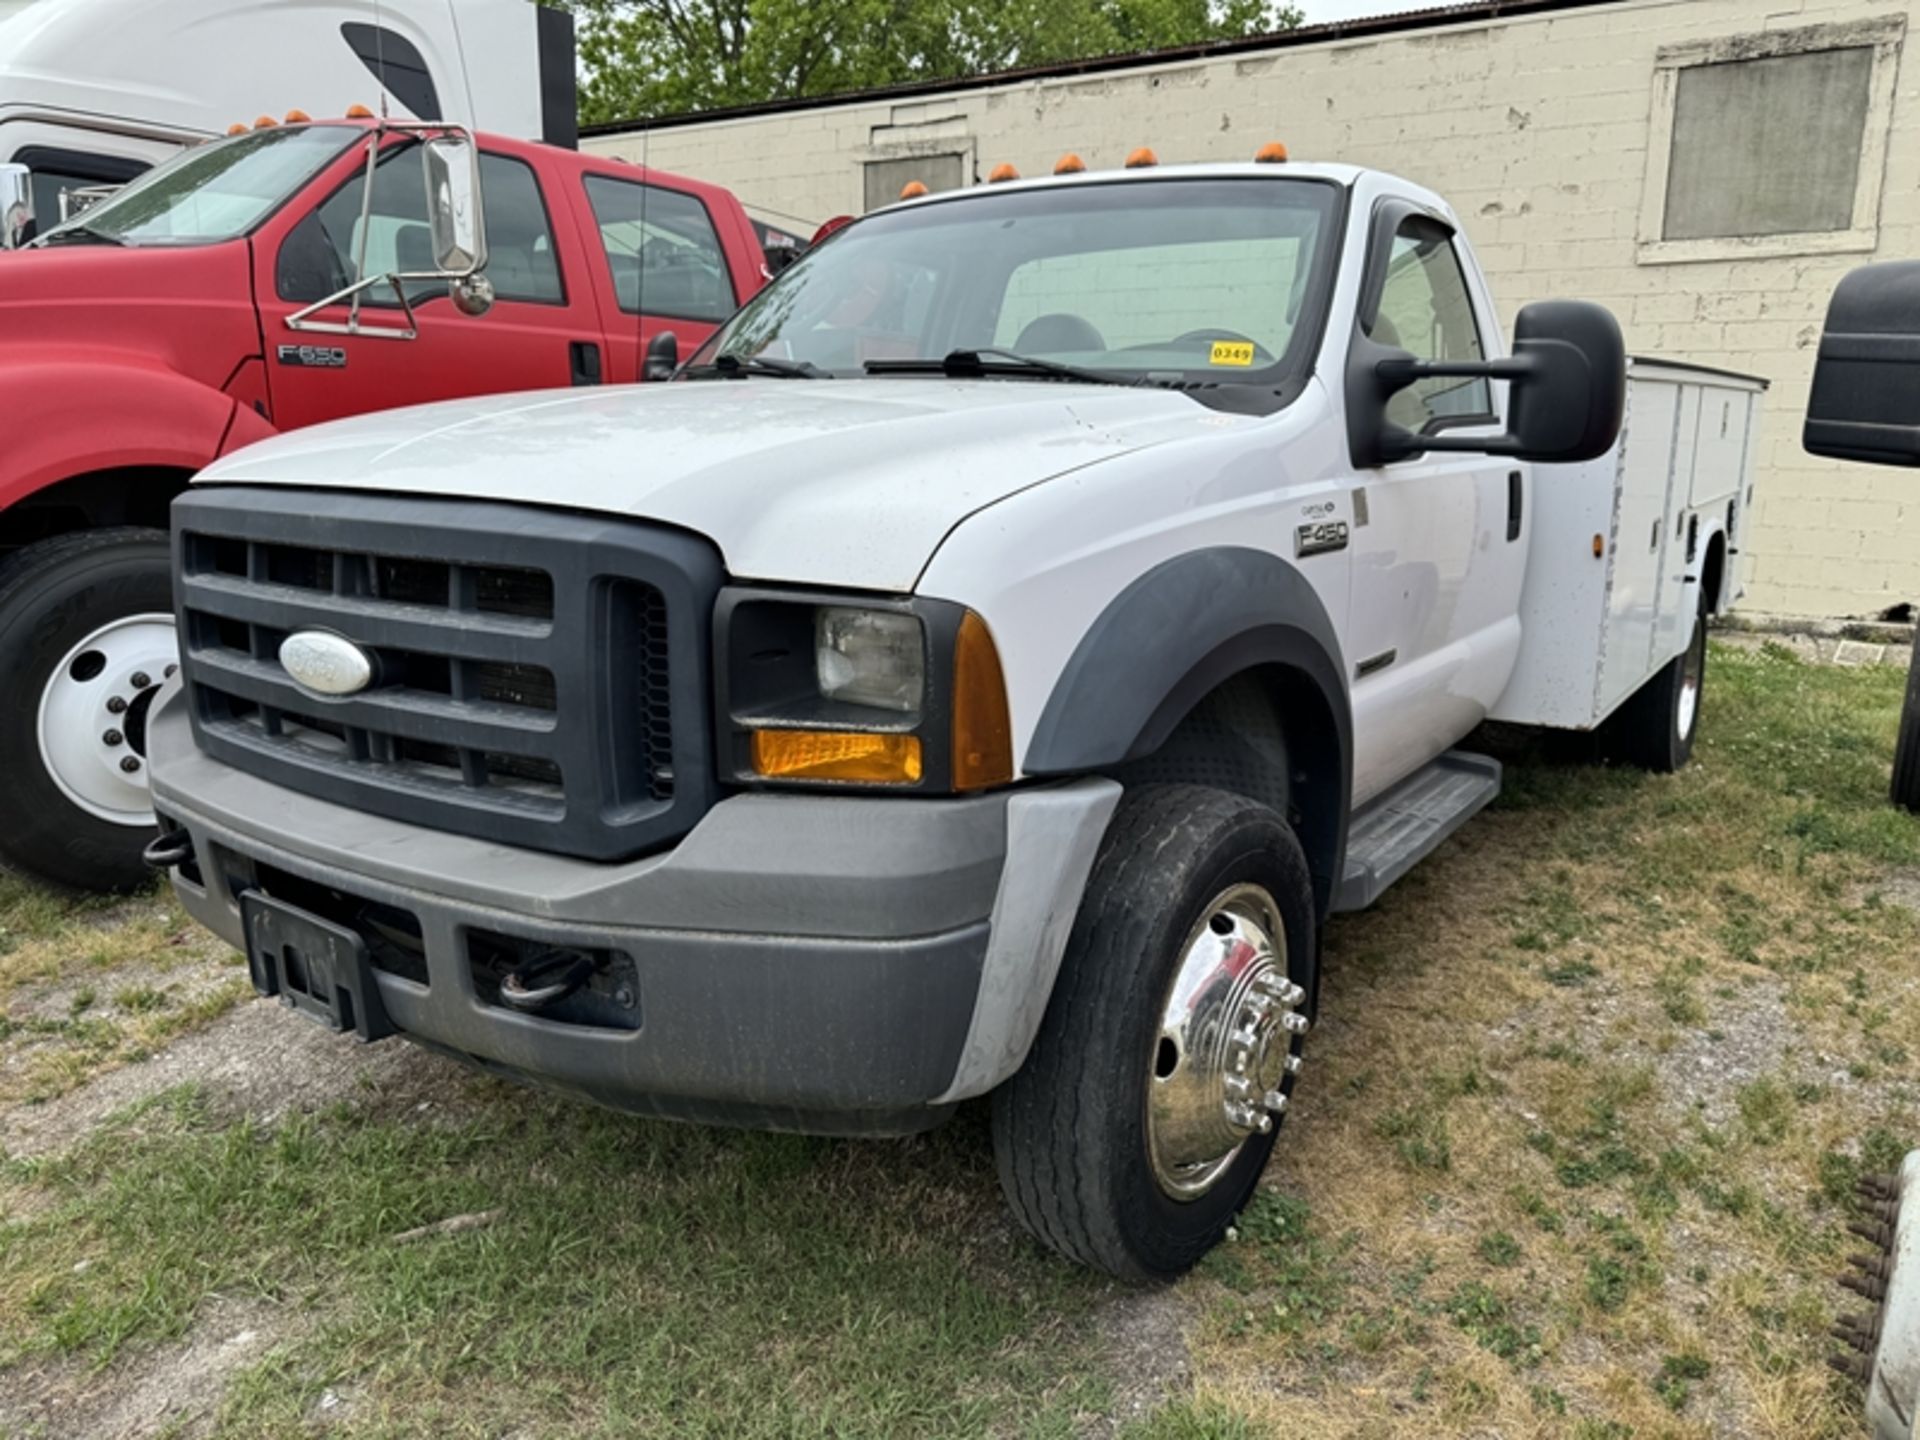 2006 FORDF-450 XL Super Duty diesel single cab 5 spd with service body - 197,409 miles showing -